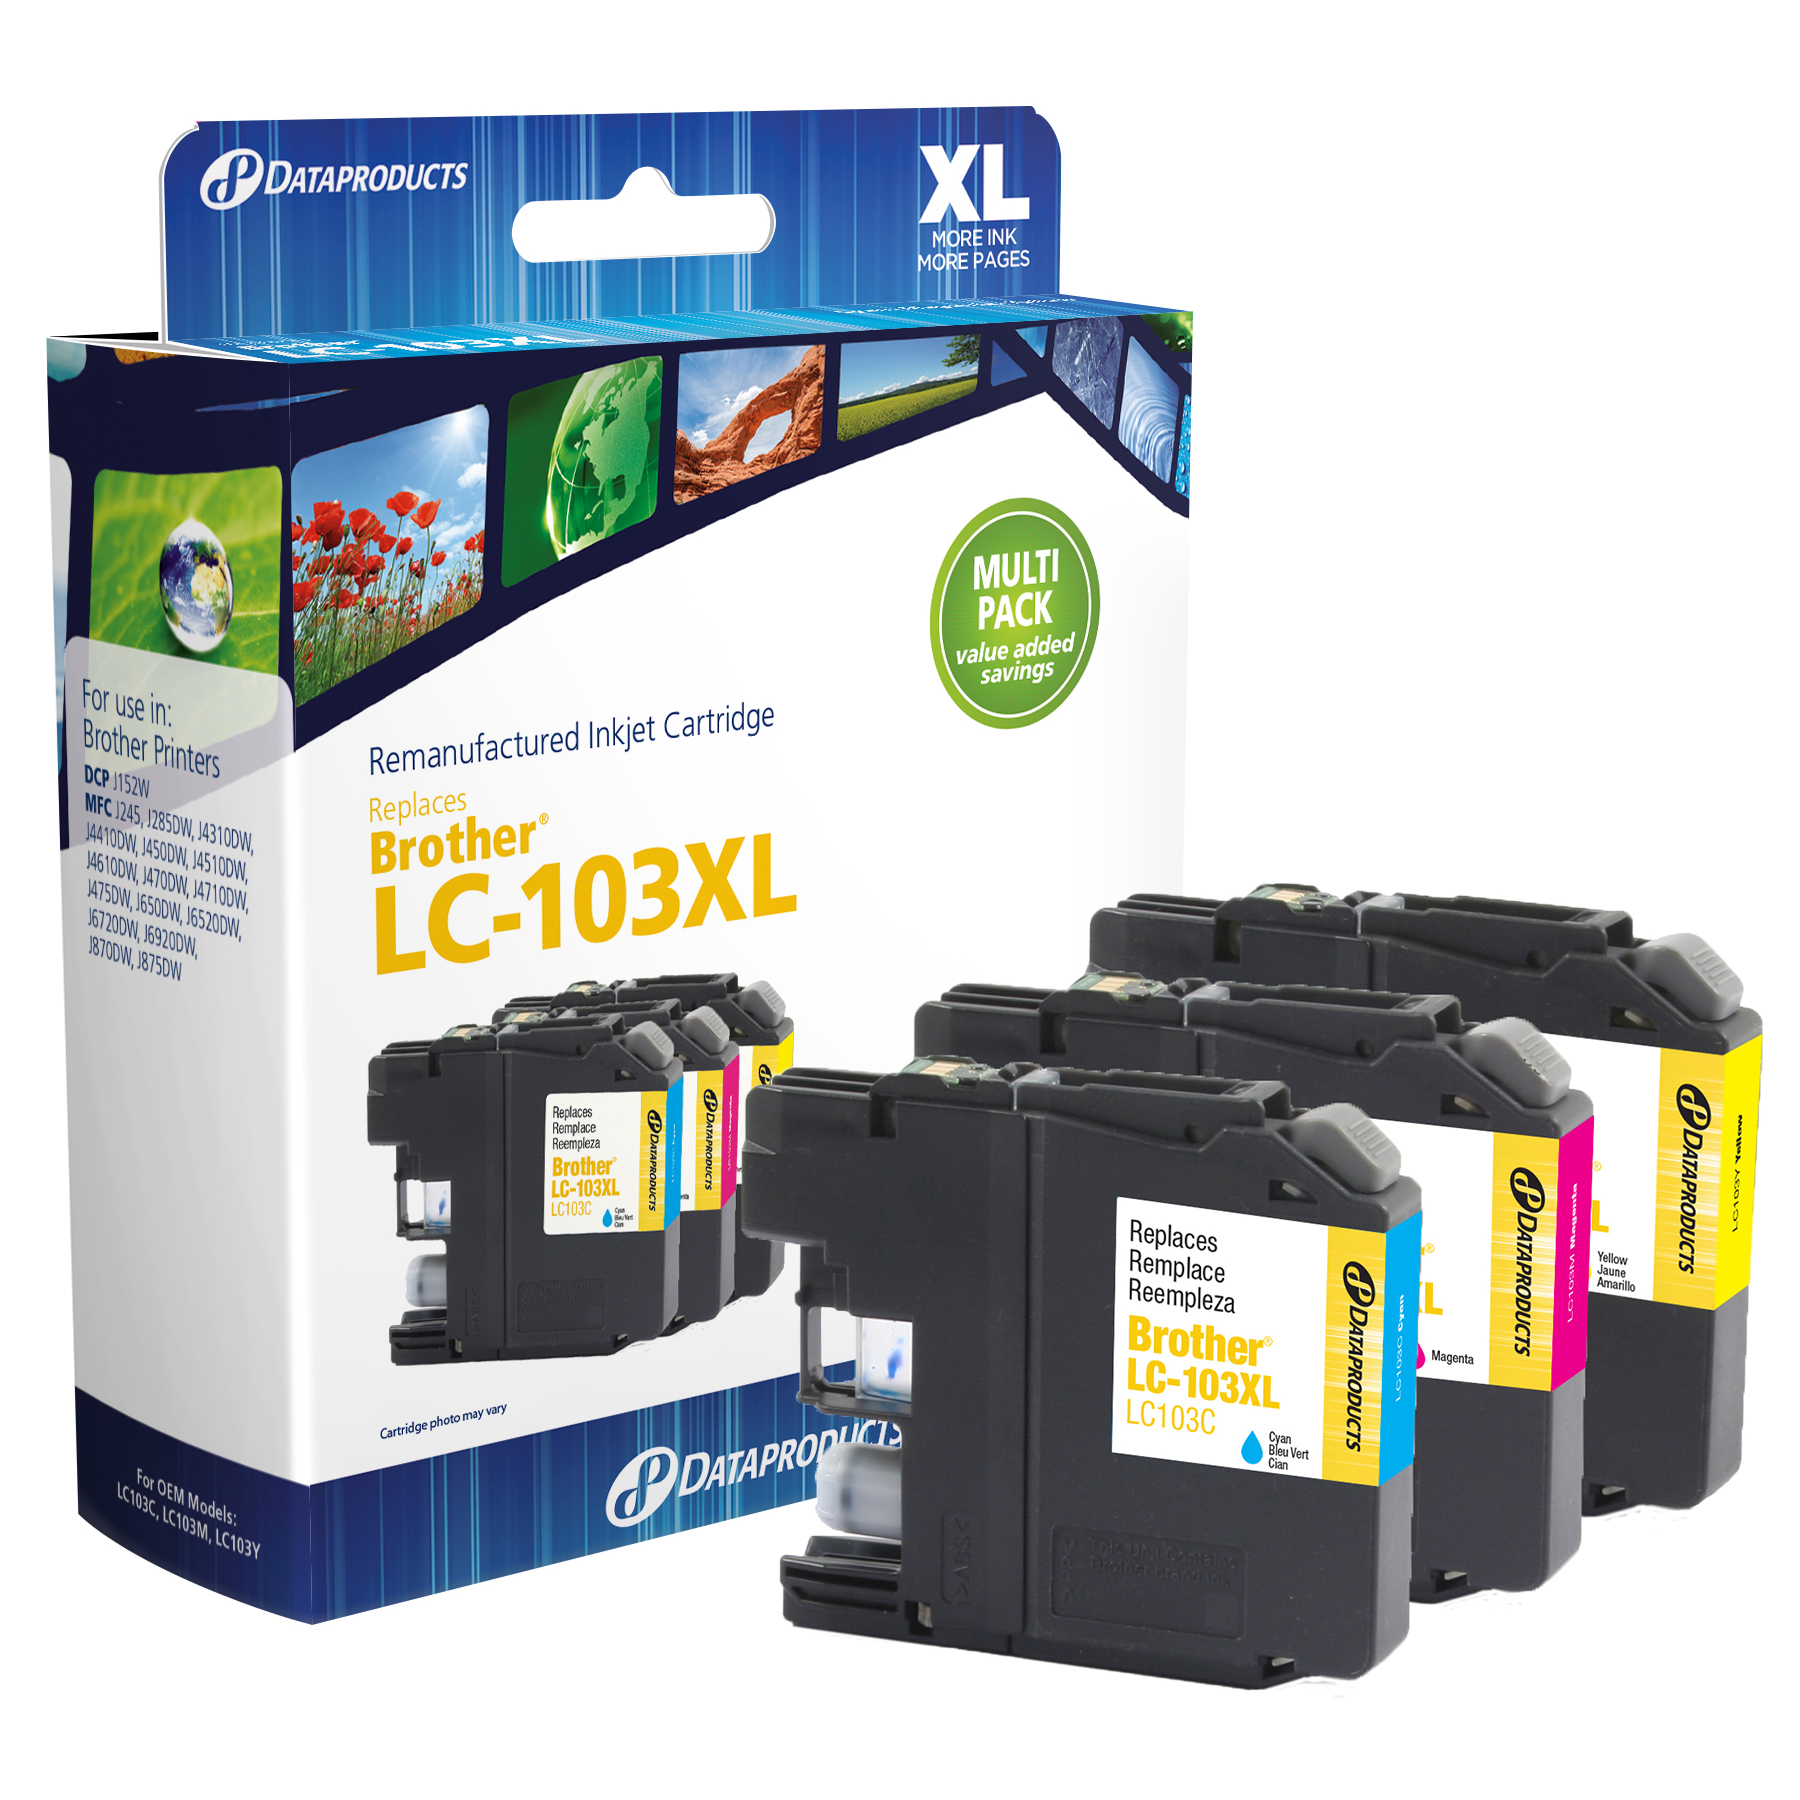 Dataproducts DPCLC103CMY Remanufactured Inkjet Cartridge for Brother LC-103XL - High Yield CMY Color Ink 3-Pack